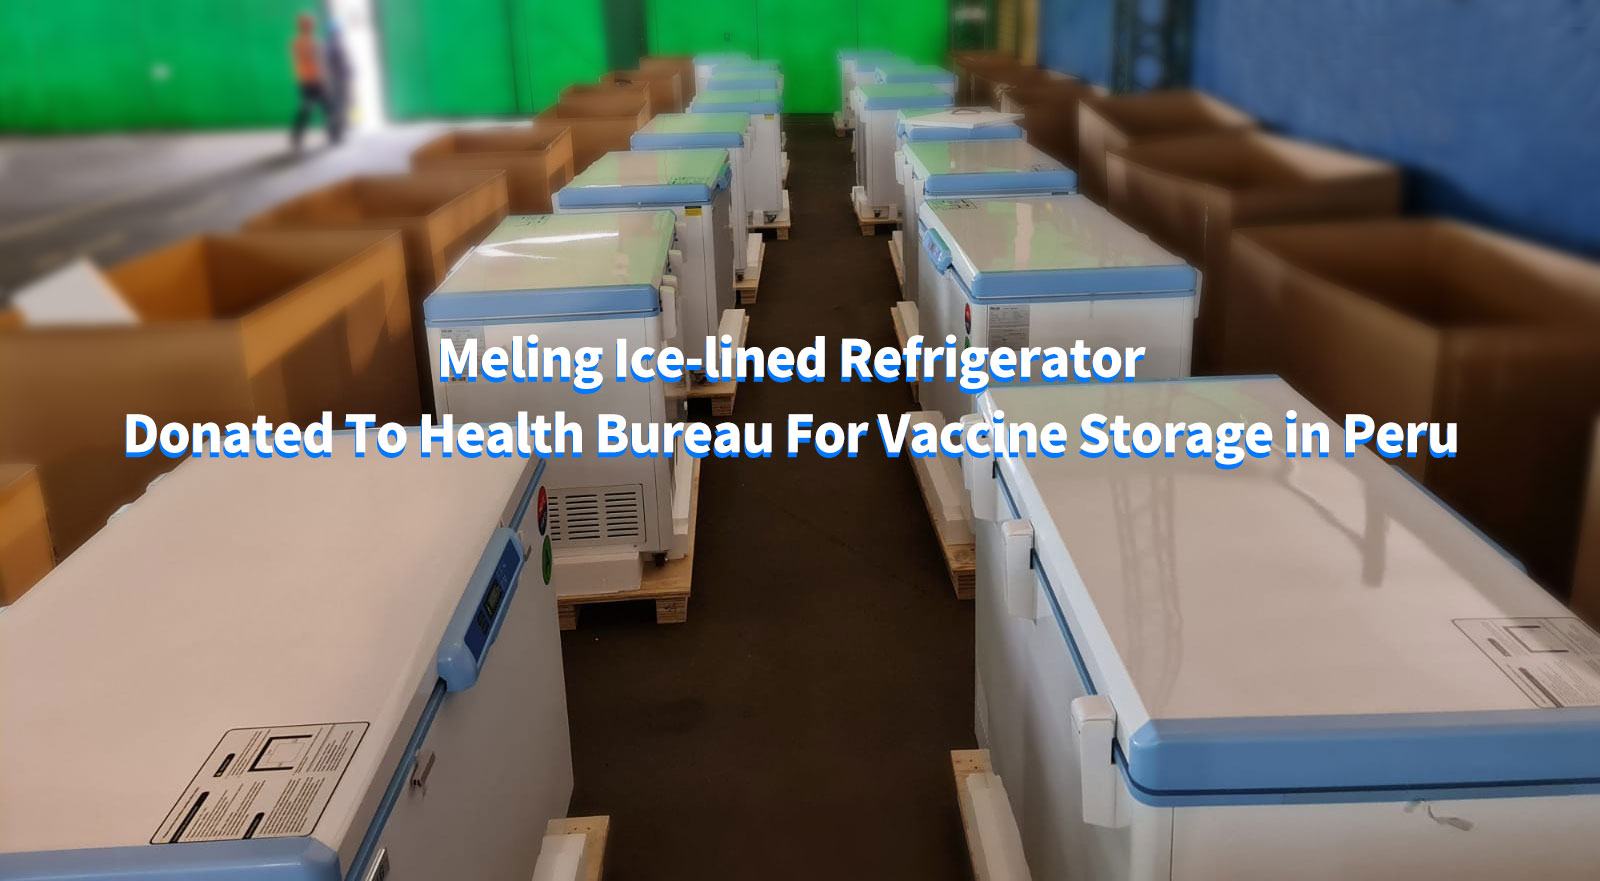 Meling Ice-lined Refrigerator Donated To Health Bureau For Vaccine Storage in Peru